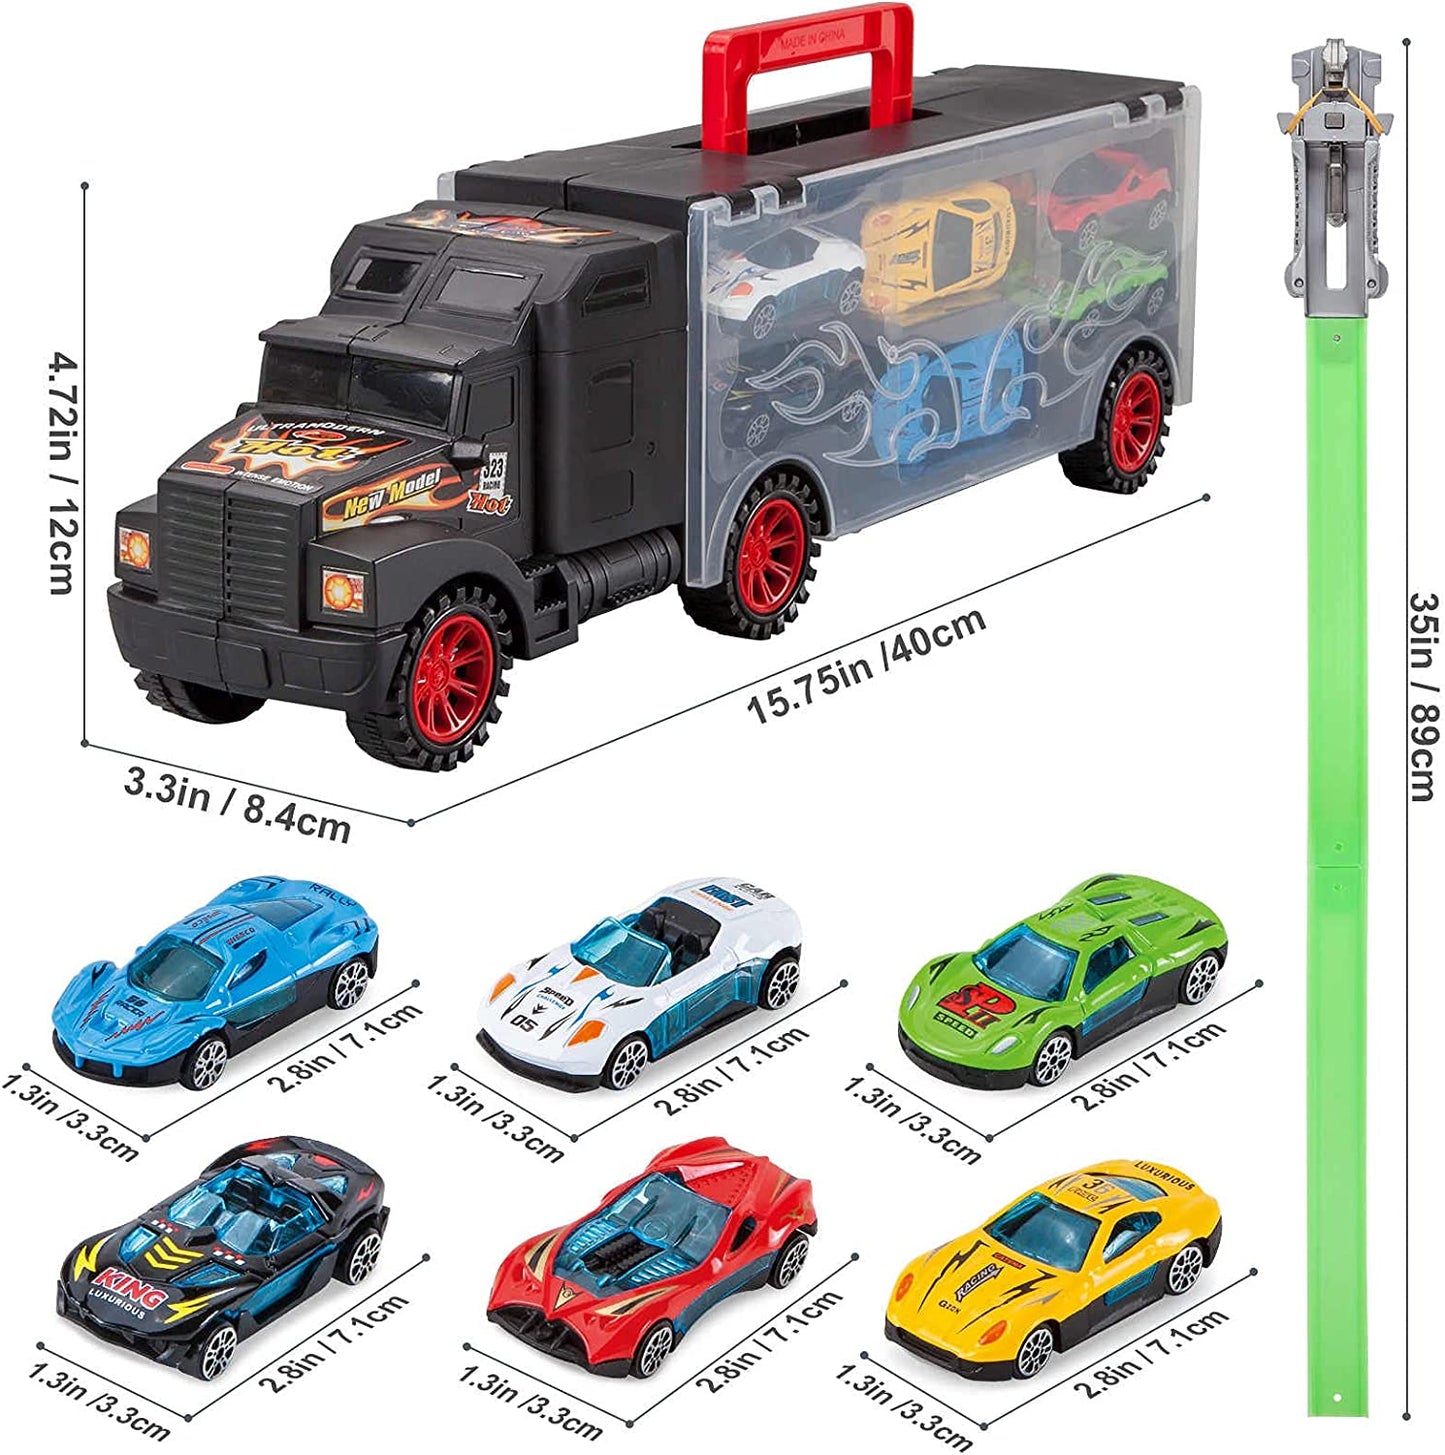 Toddler Toys for 3-5 Year Old Boys,Toy Truck Carrier with 12 Die-Cast Vehicles Toy Cars and 2 Race Tracks,Gift for Kids Age 3 4 5 6 7